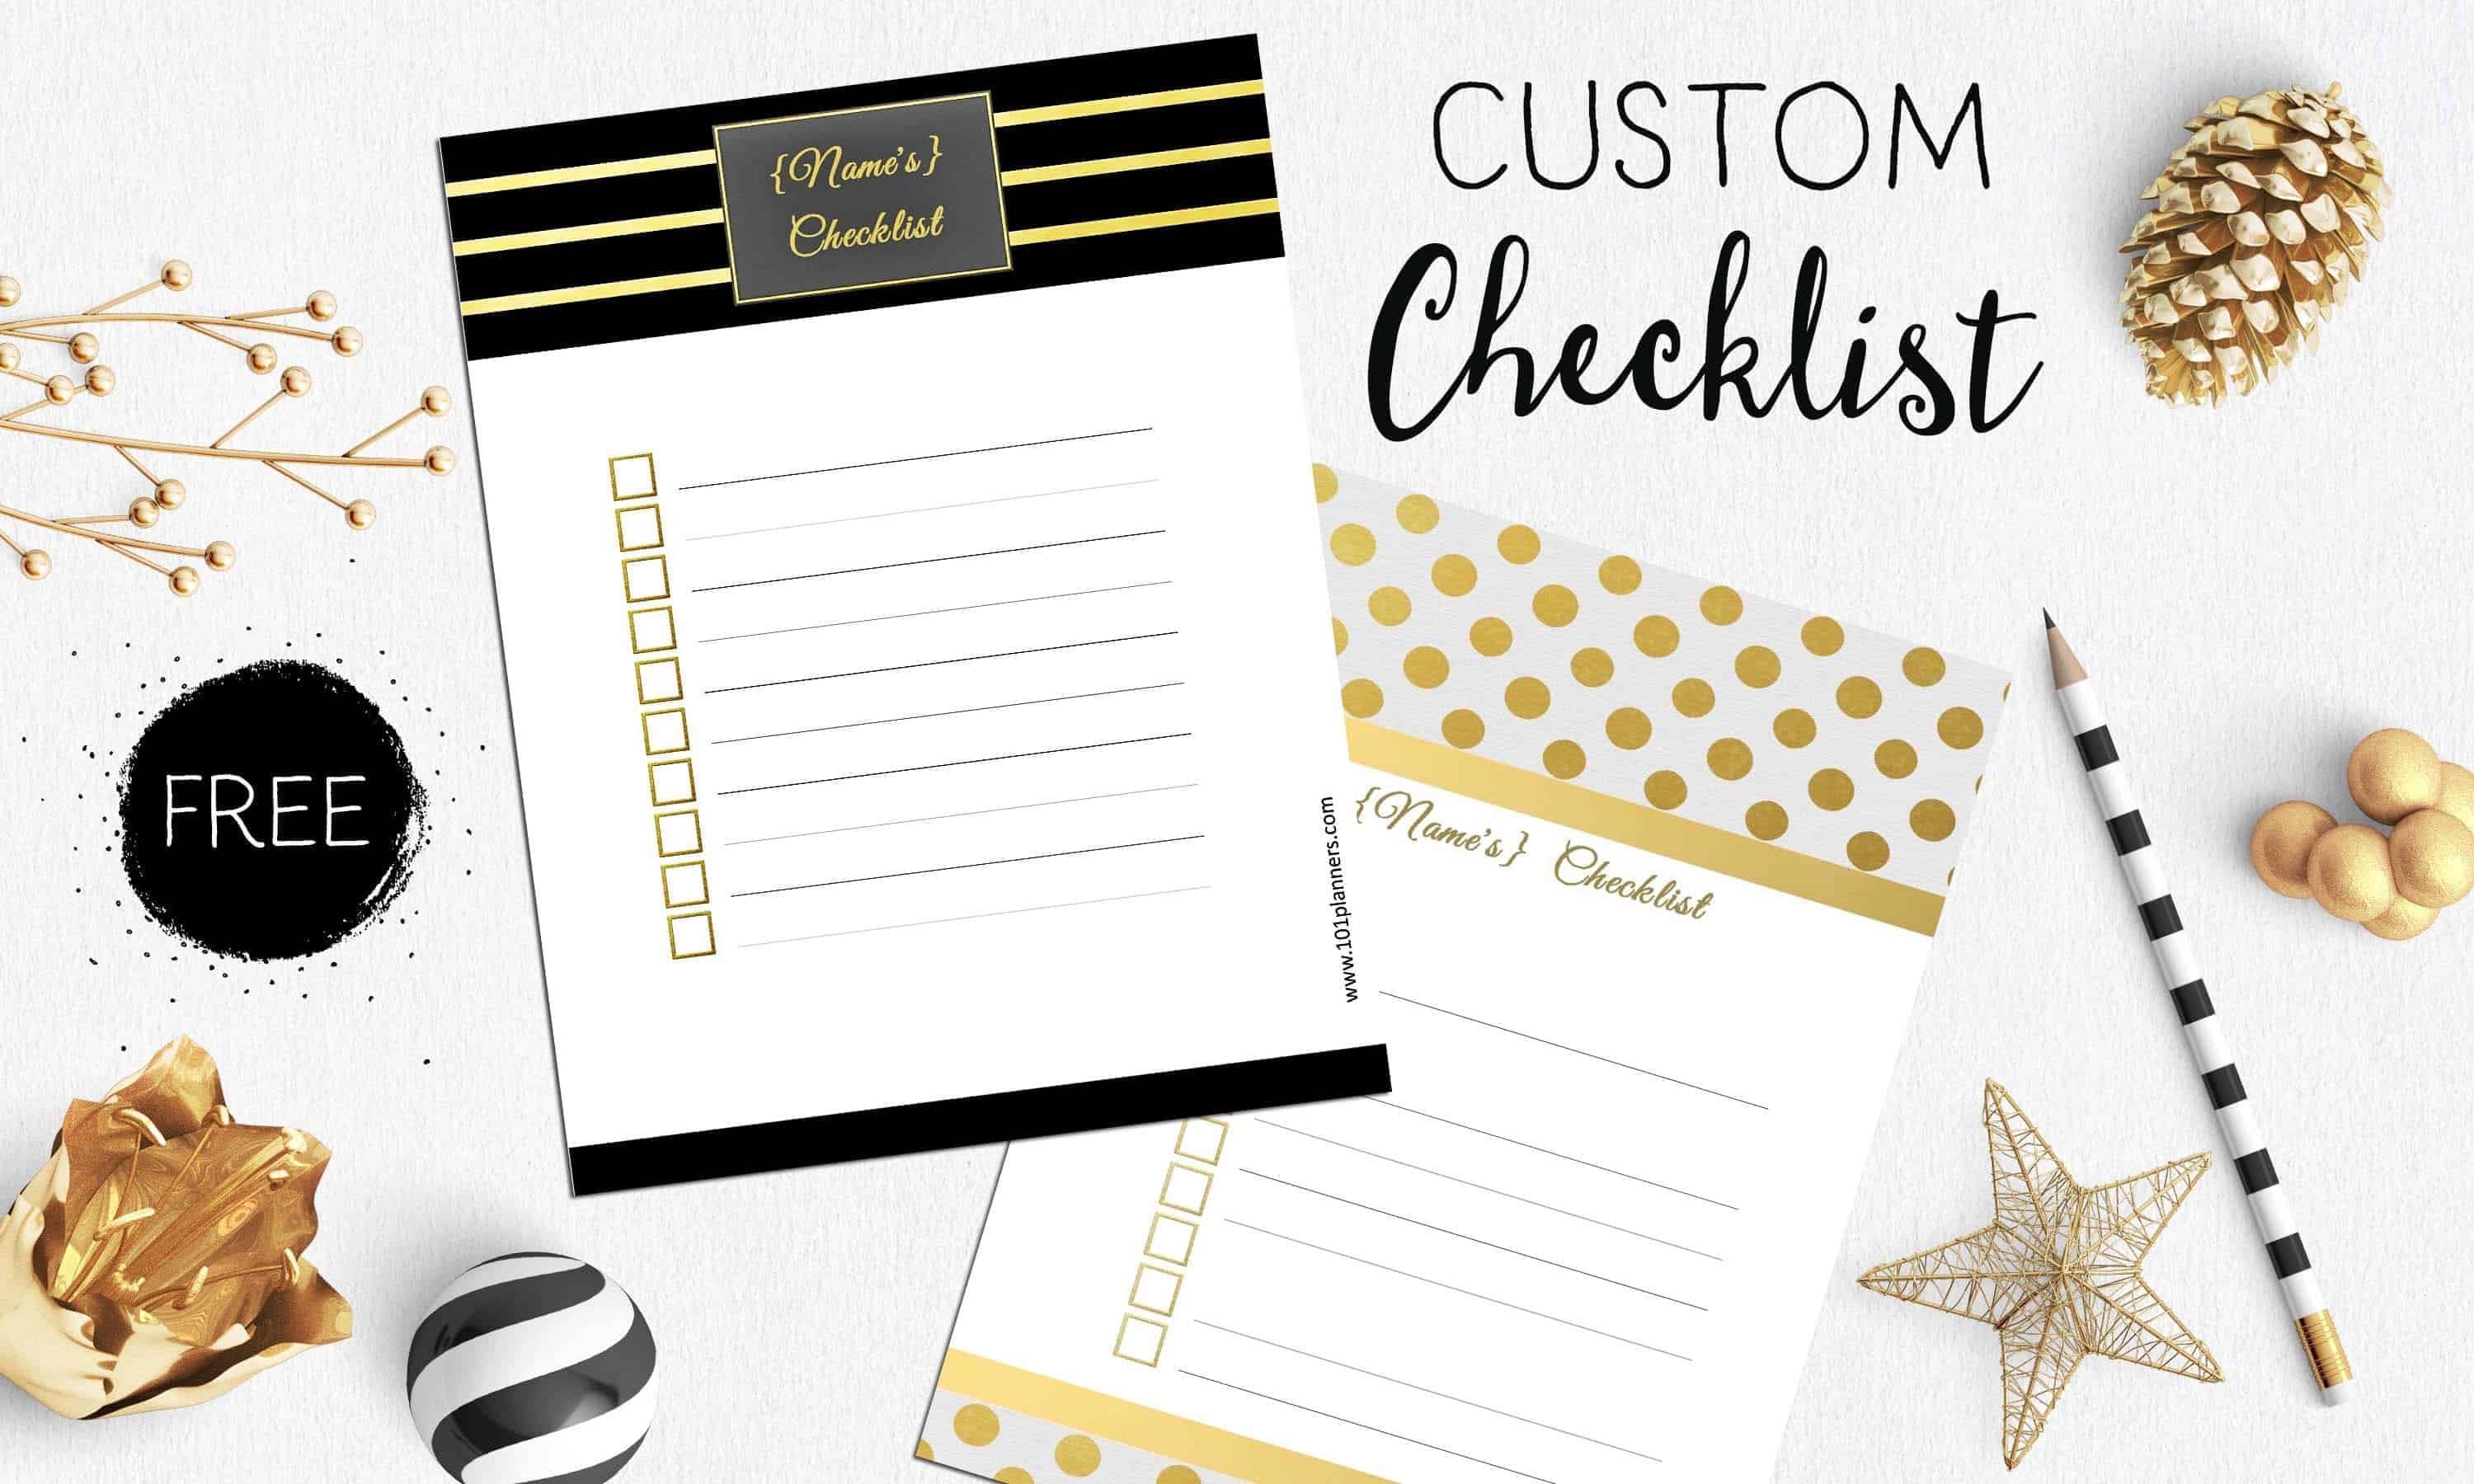 10-best-housekeeping-cleaning-checklist-printable-for-free-at